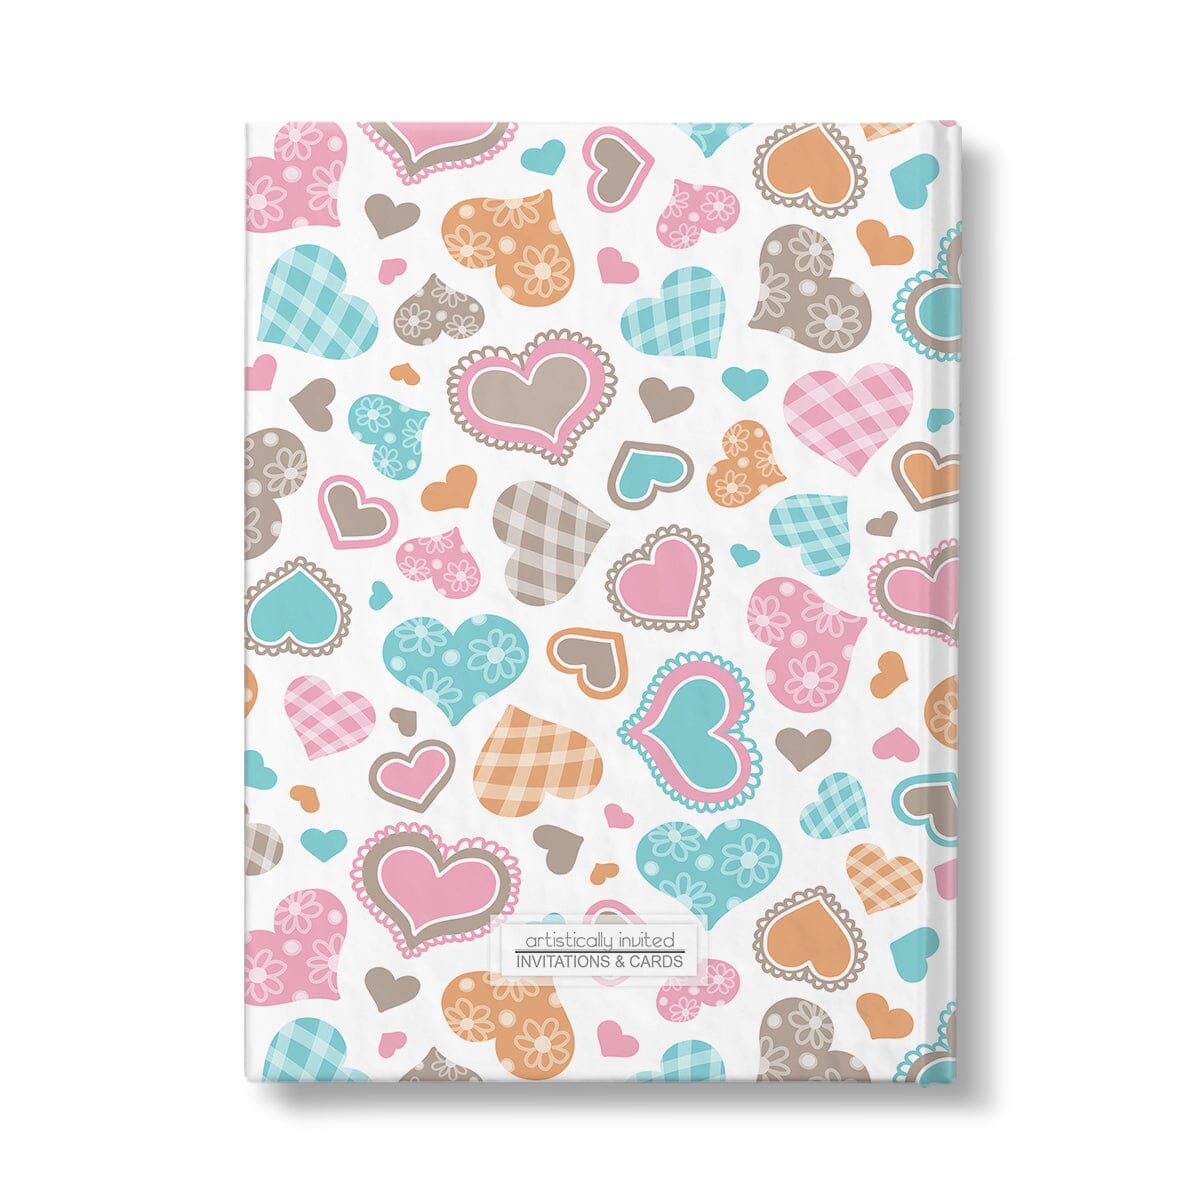 Personalized Cutesy Hearts Pattern Journal at Artistically Invited. Back side of journal.